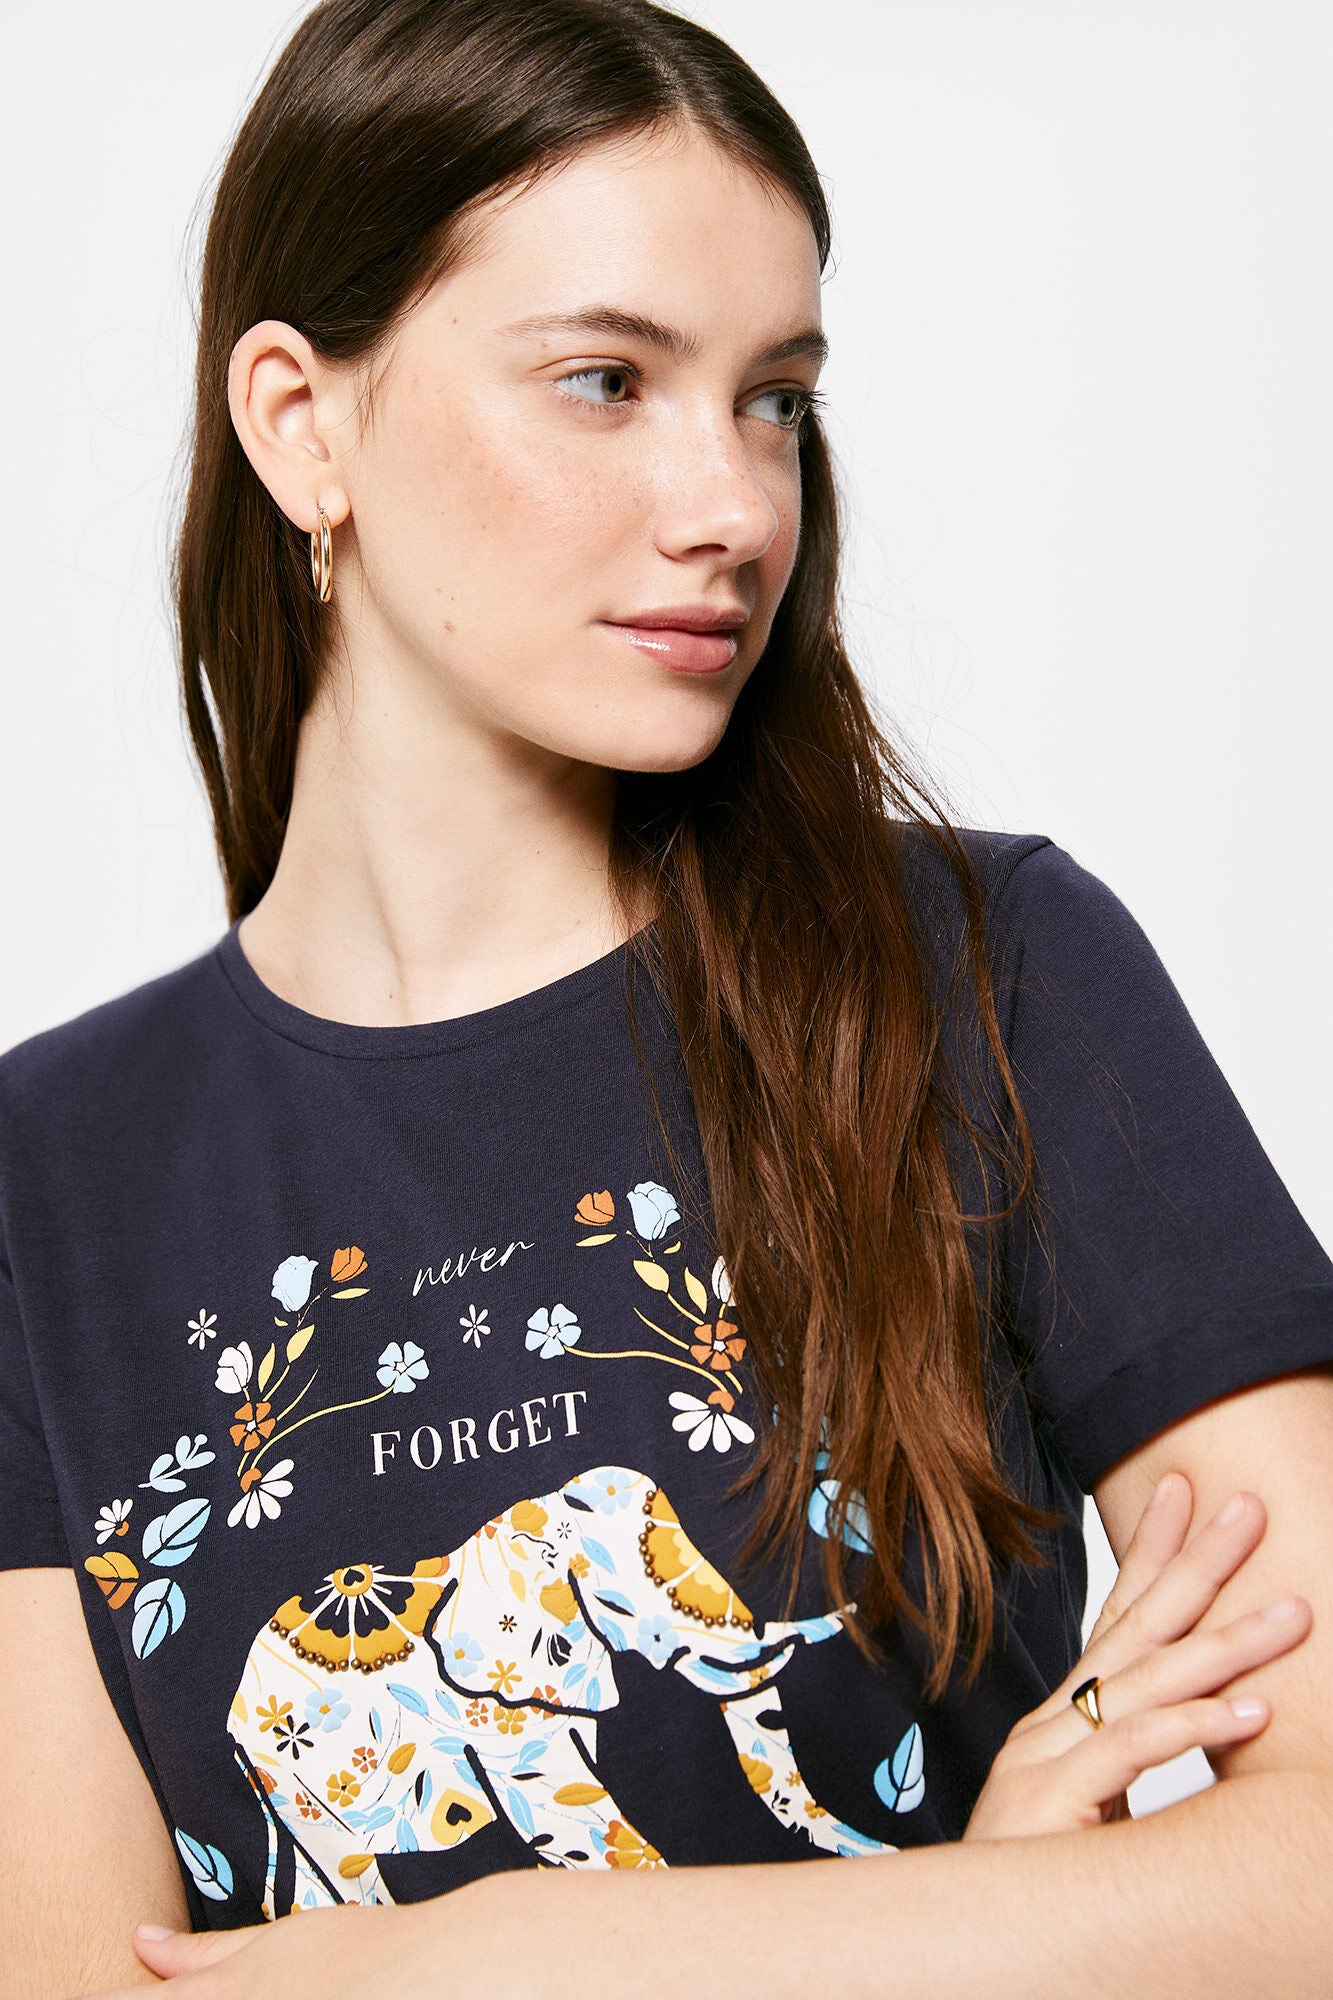 "Never forget your beginnings" T-shirt